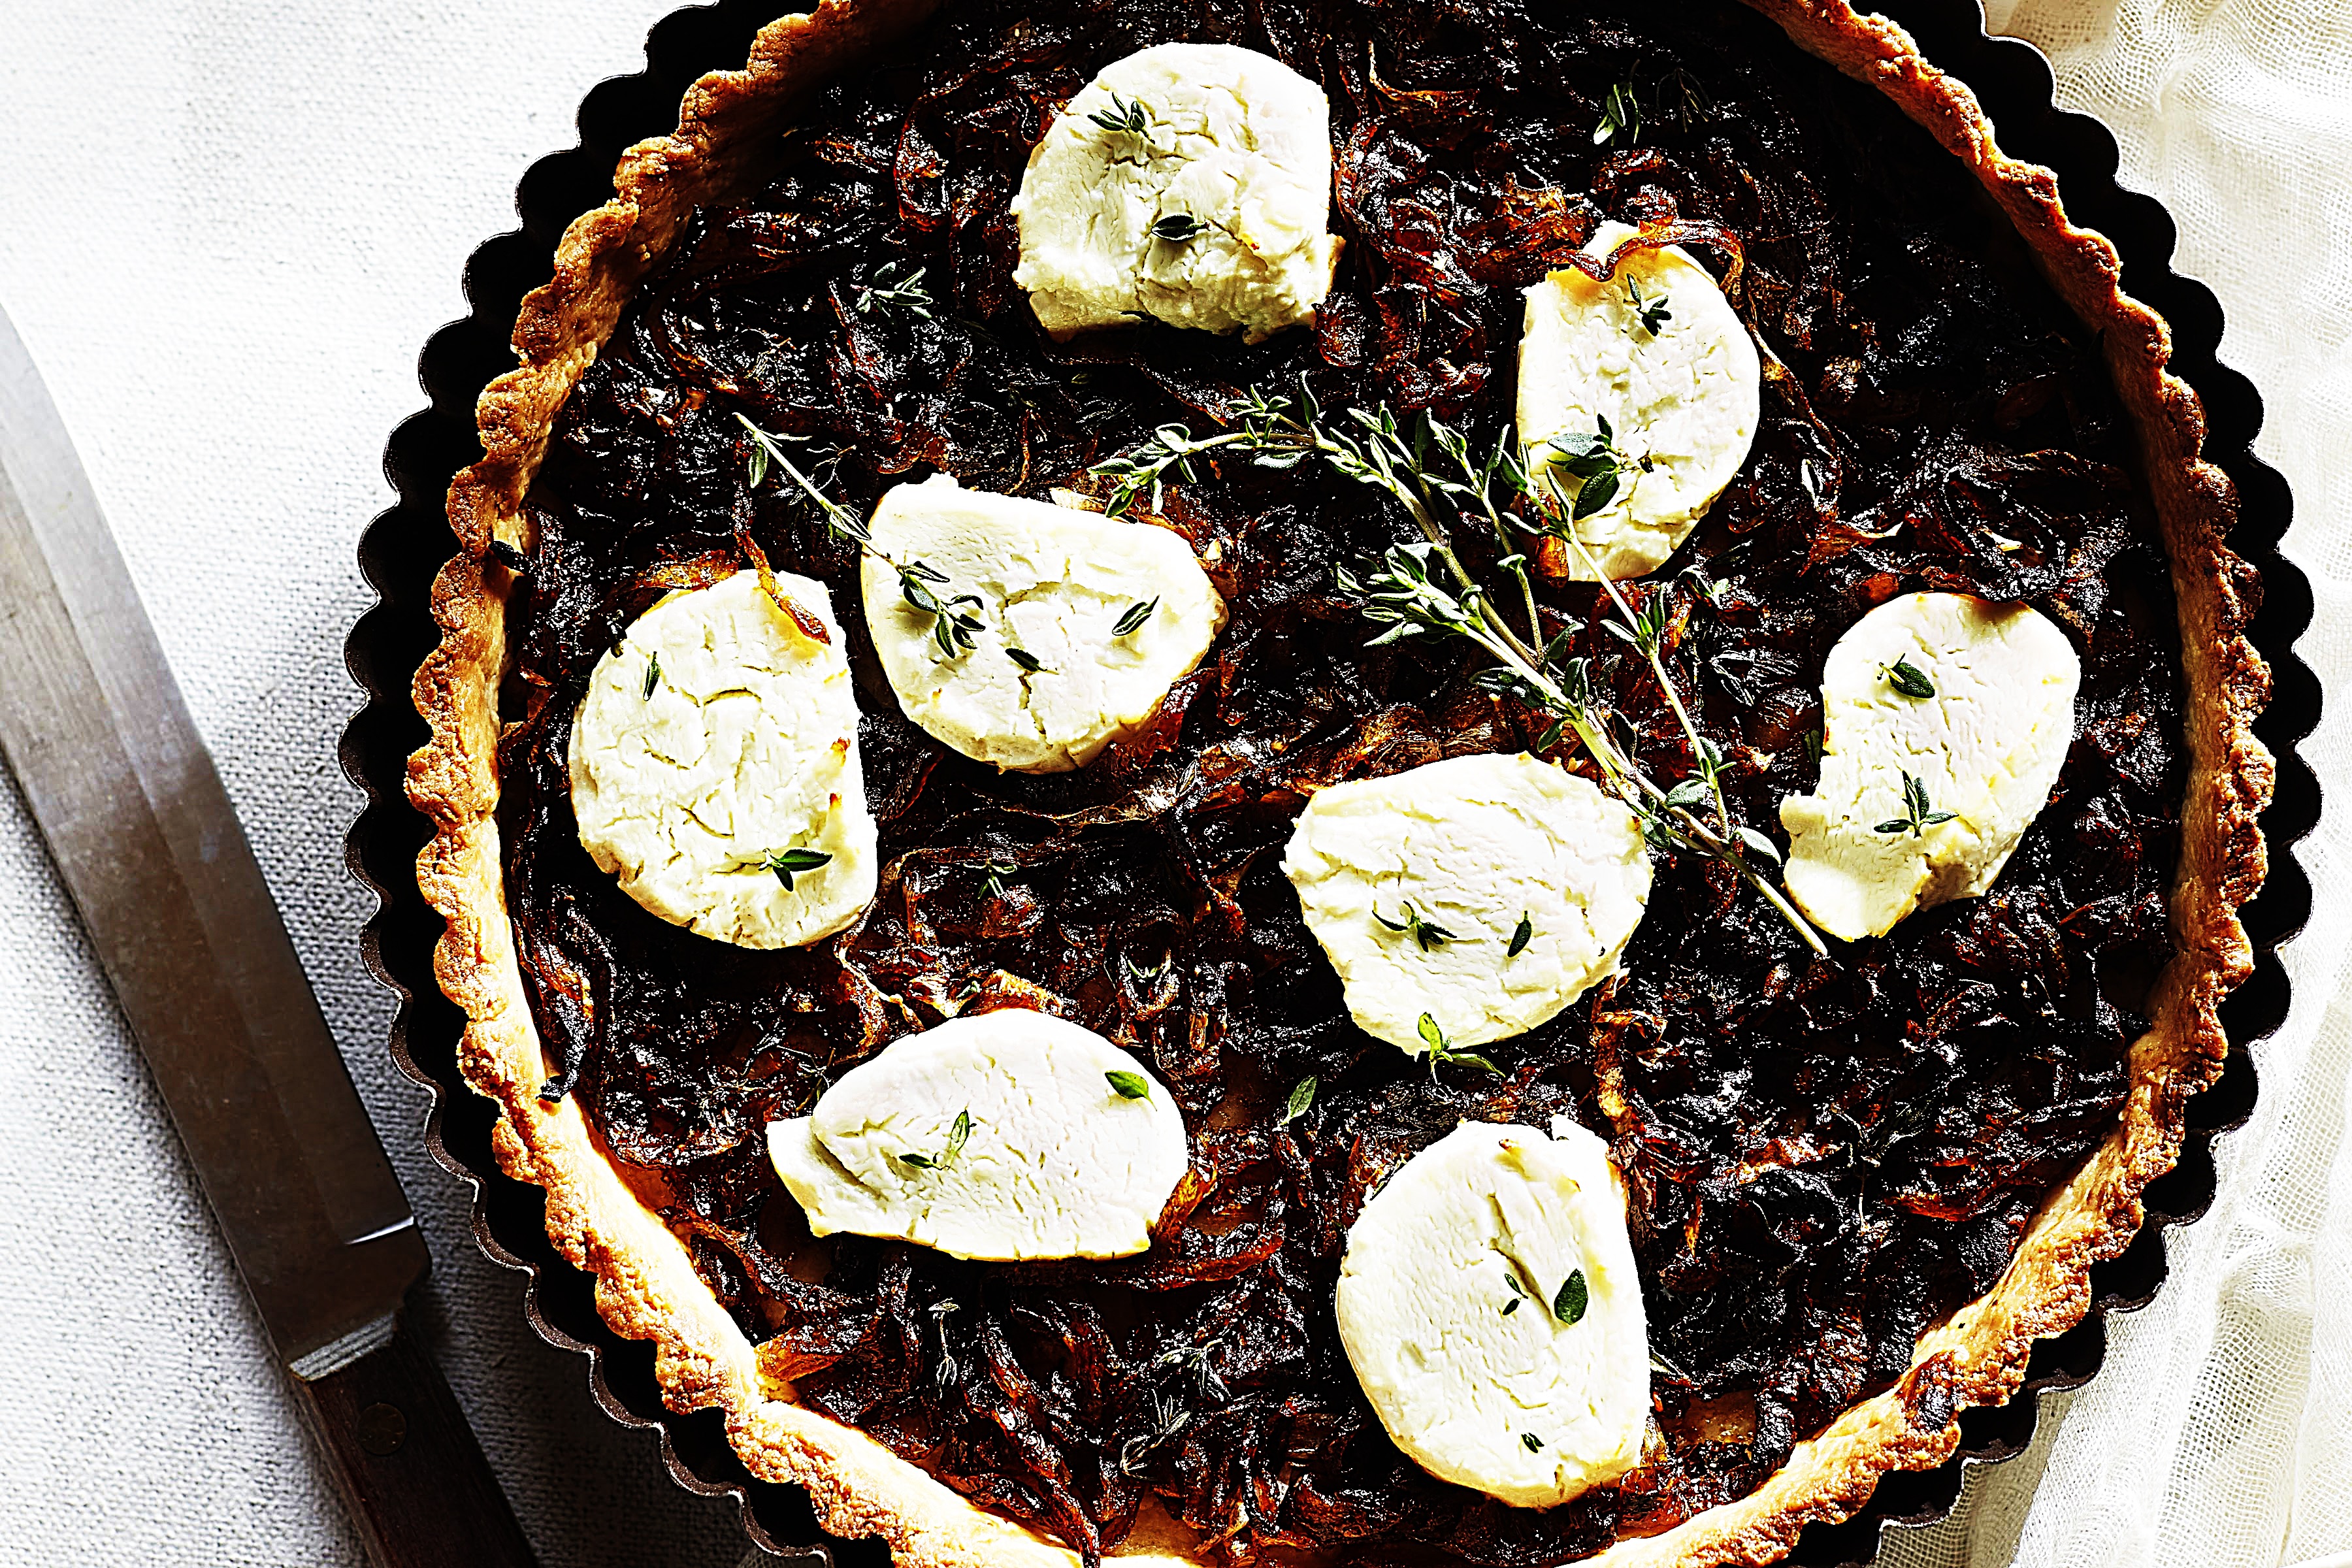 Stupid-Easy Recipe for Caramelized Onion and Goat Cheese Tart (#1 Top-Rated)